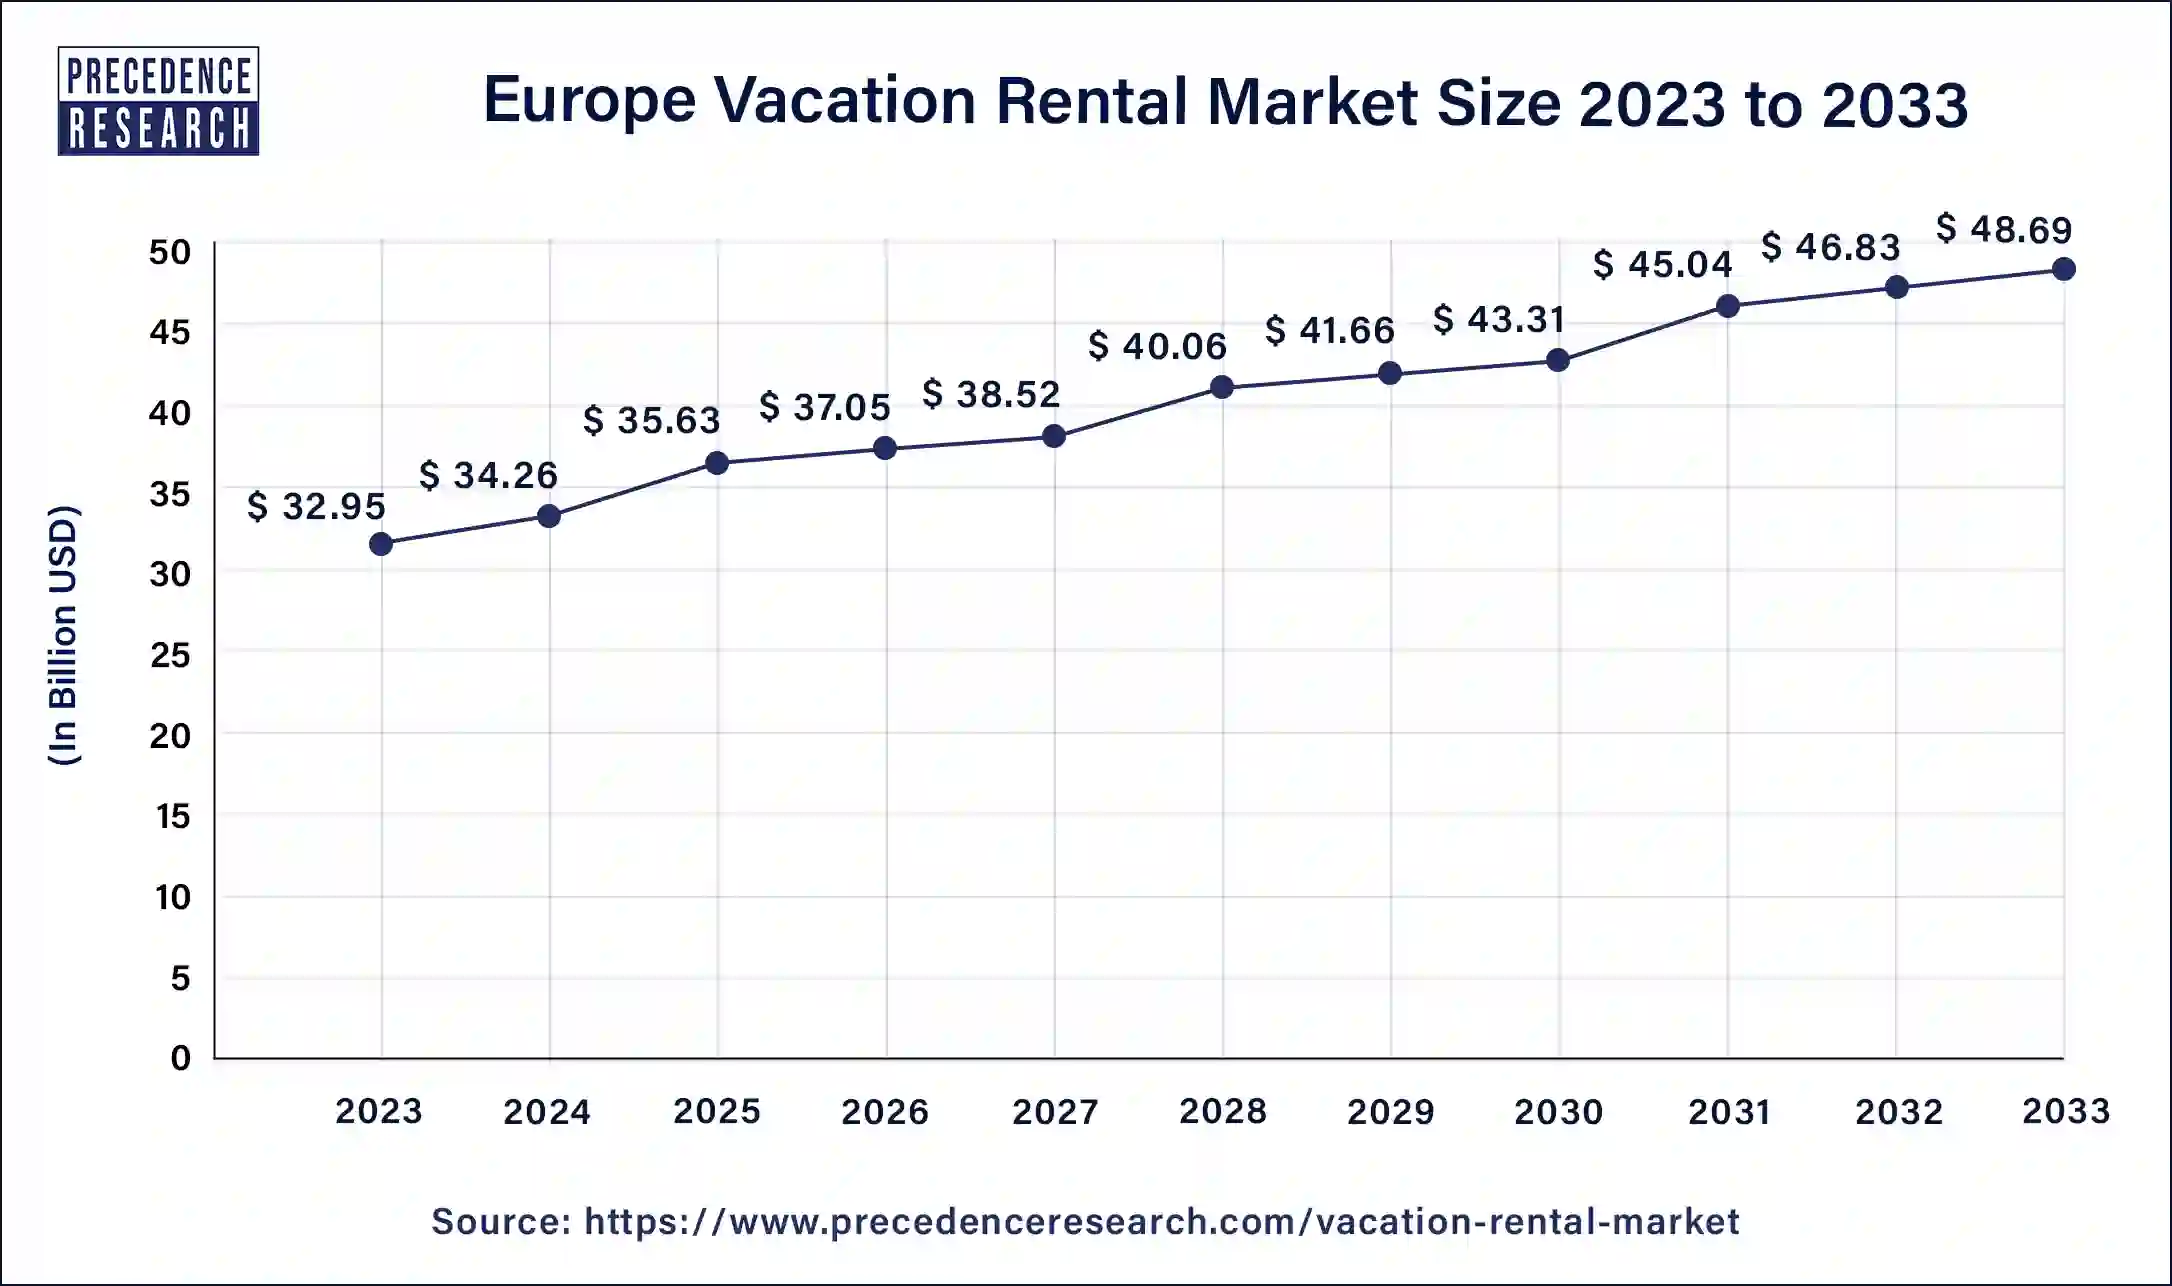 Europe Vacation Rental Market Size 2024 to 2033